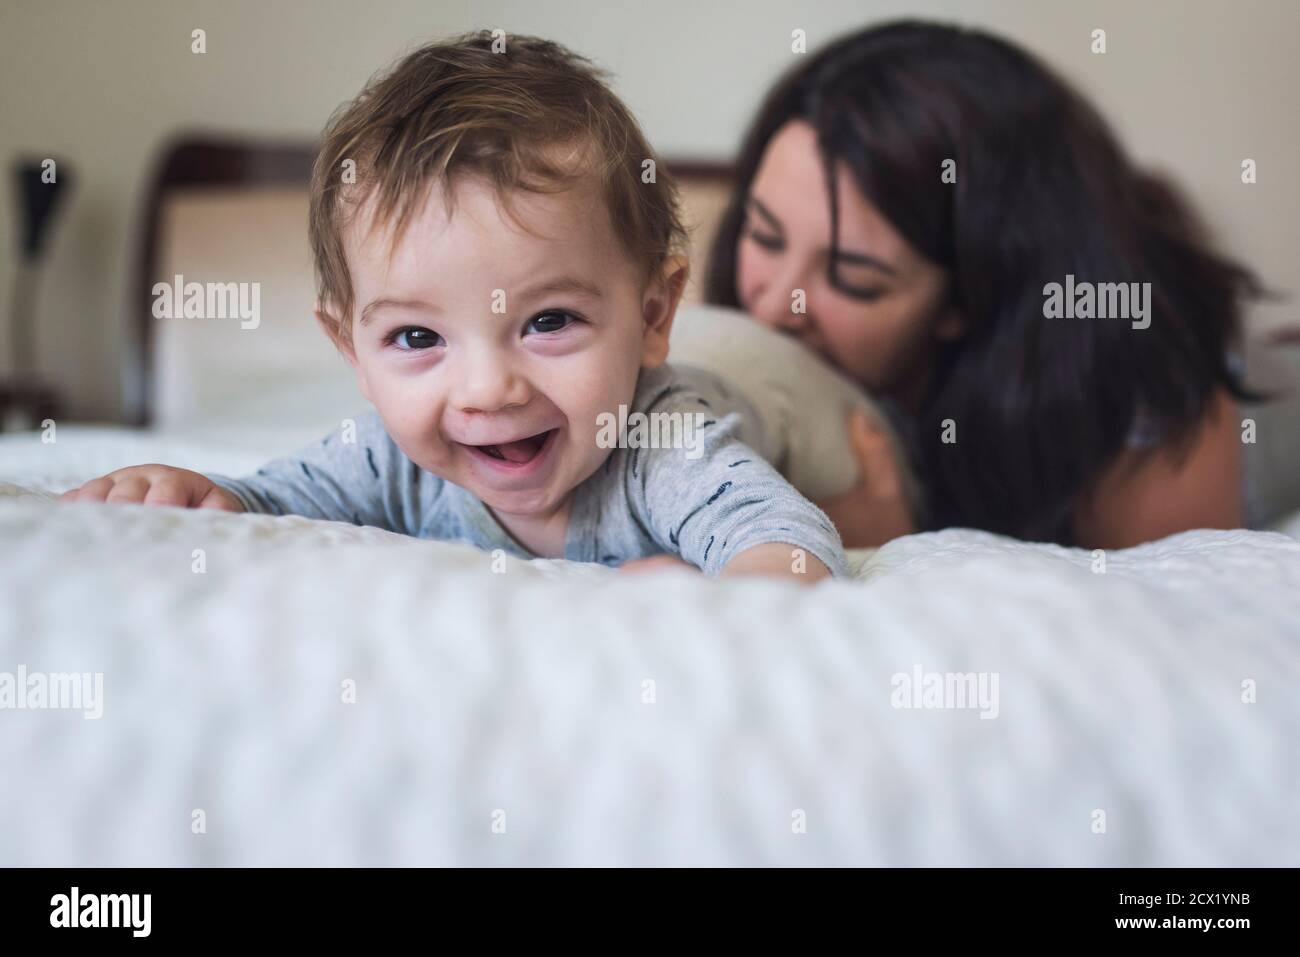 Laughing year old baby on stomach on bed with playful mid-30's mother Stock Photo